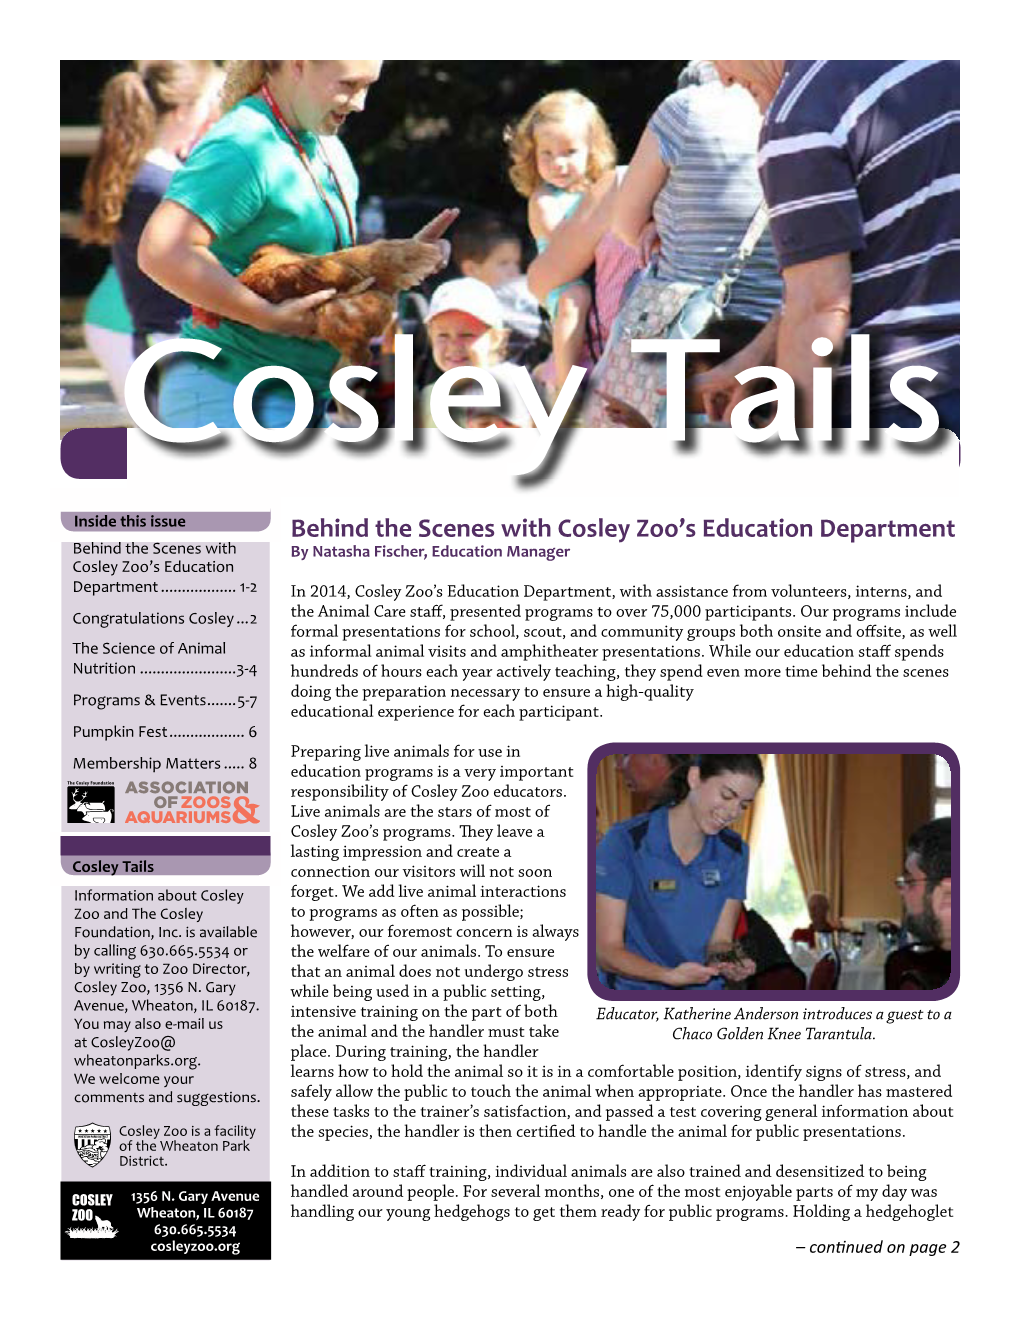 Behind the Scenes with Cosley Zoo's Education Department